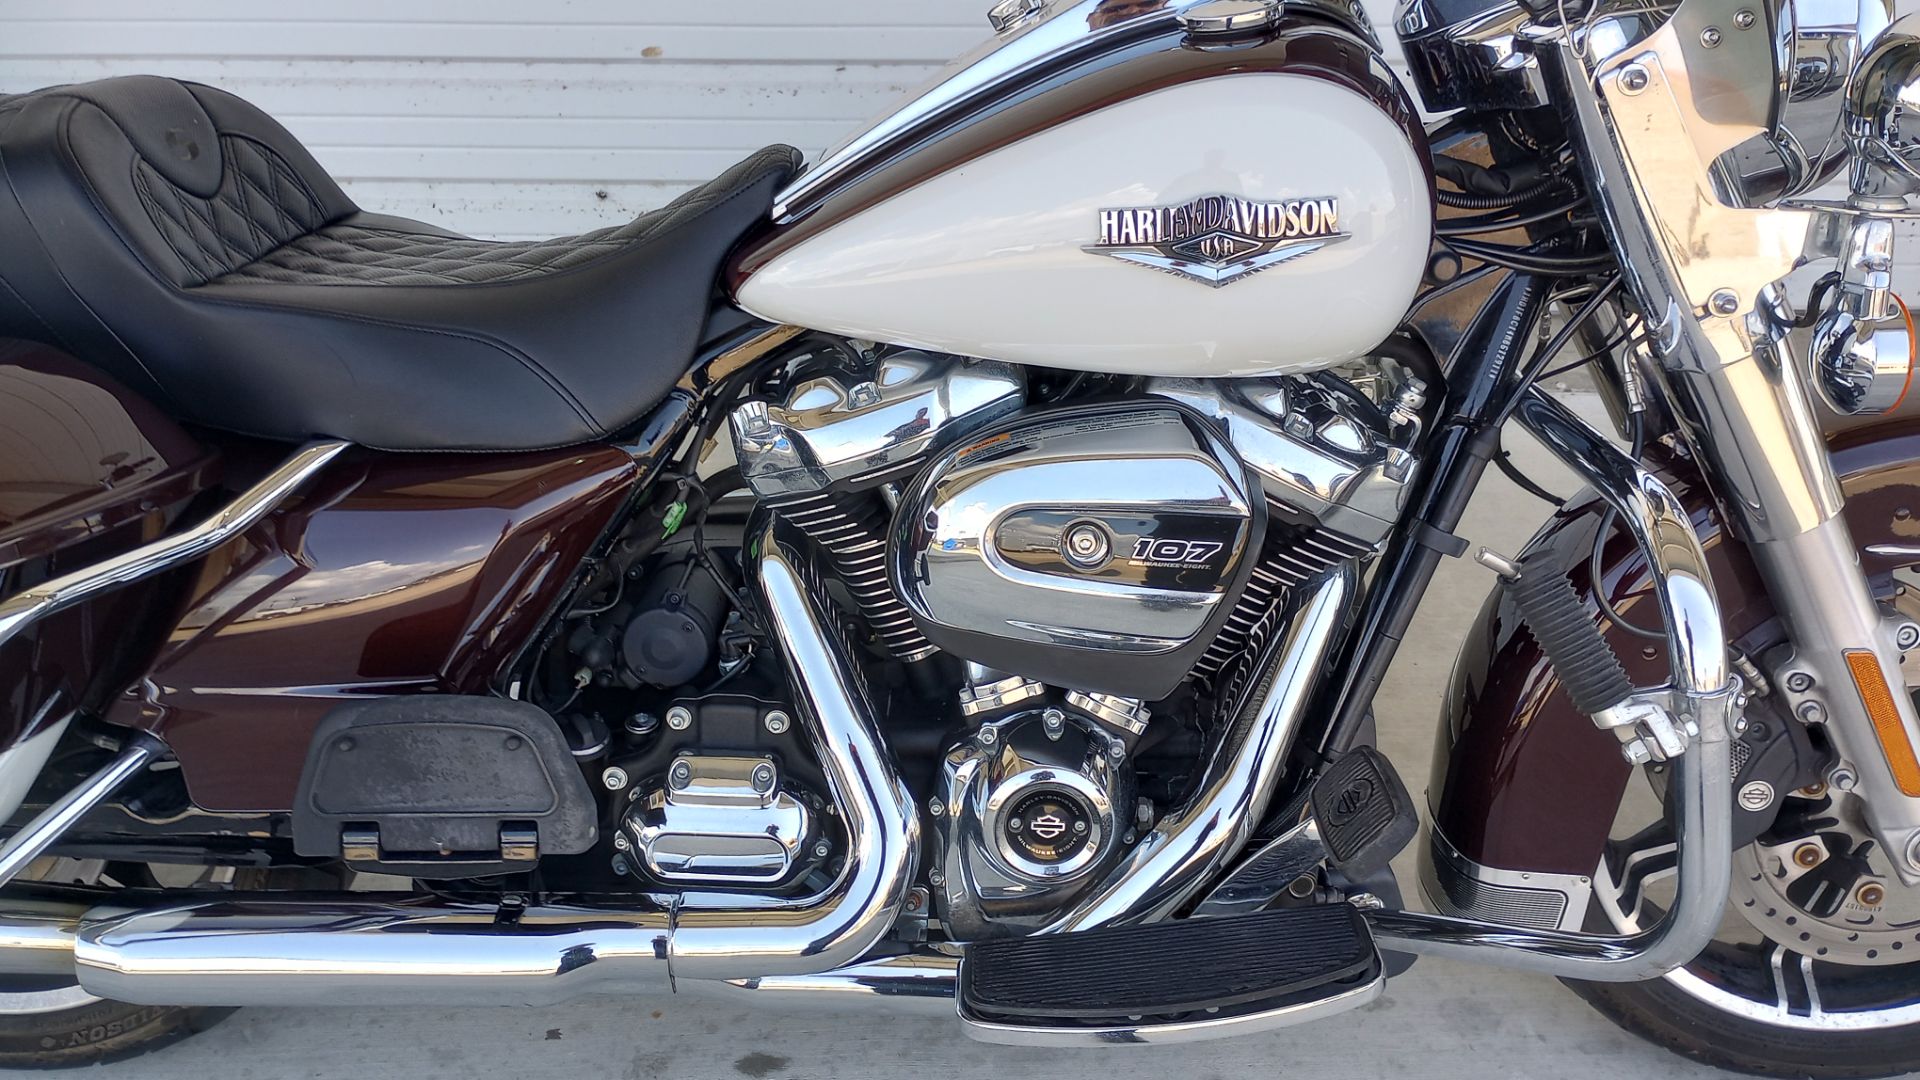 2021 harley davidson road king for sale in texas - Photo 4